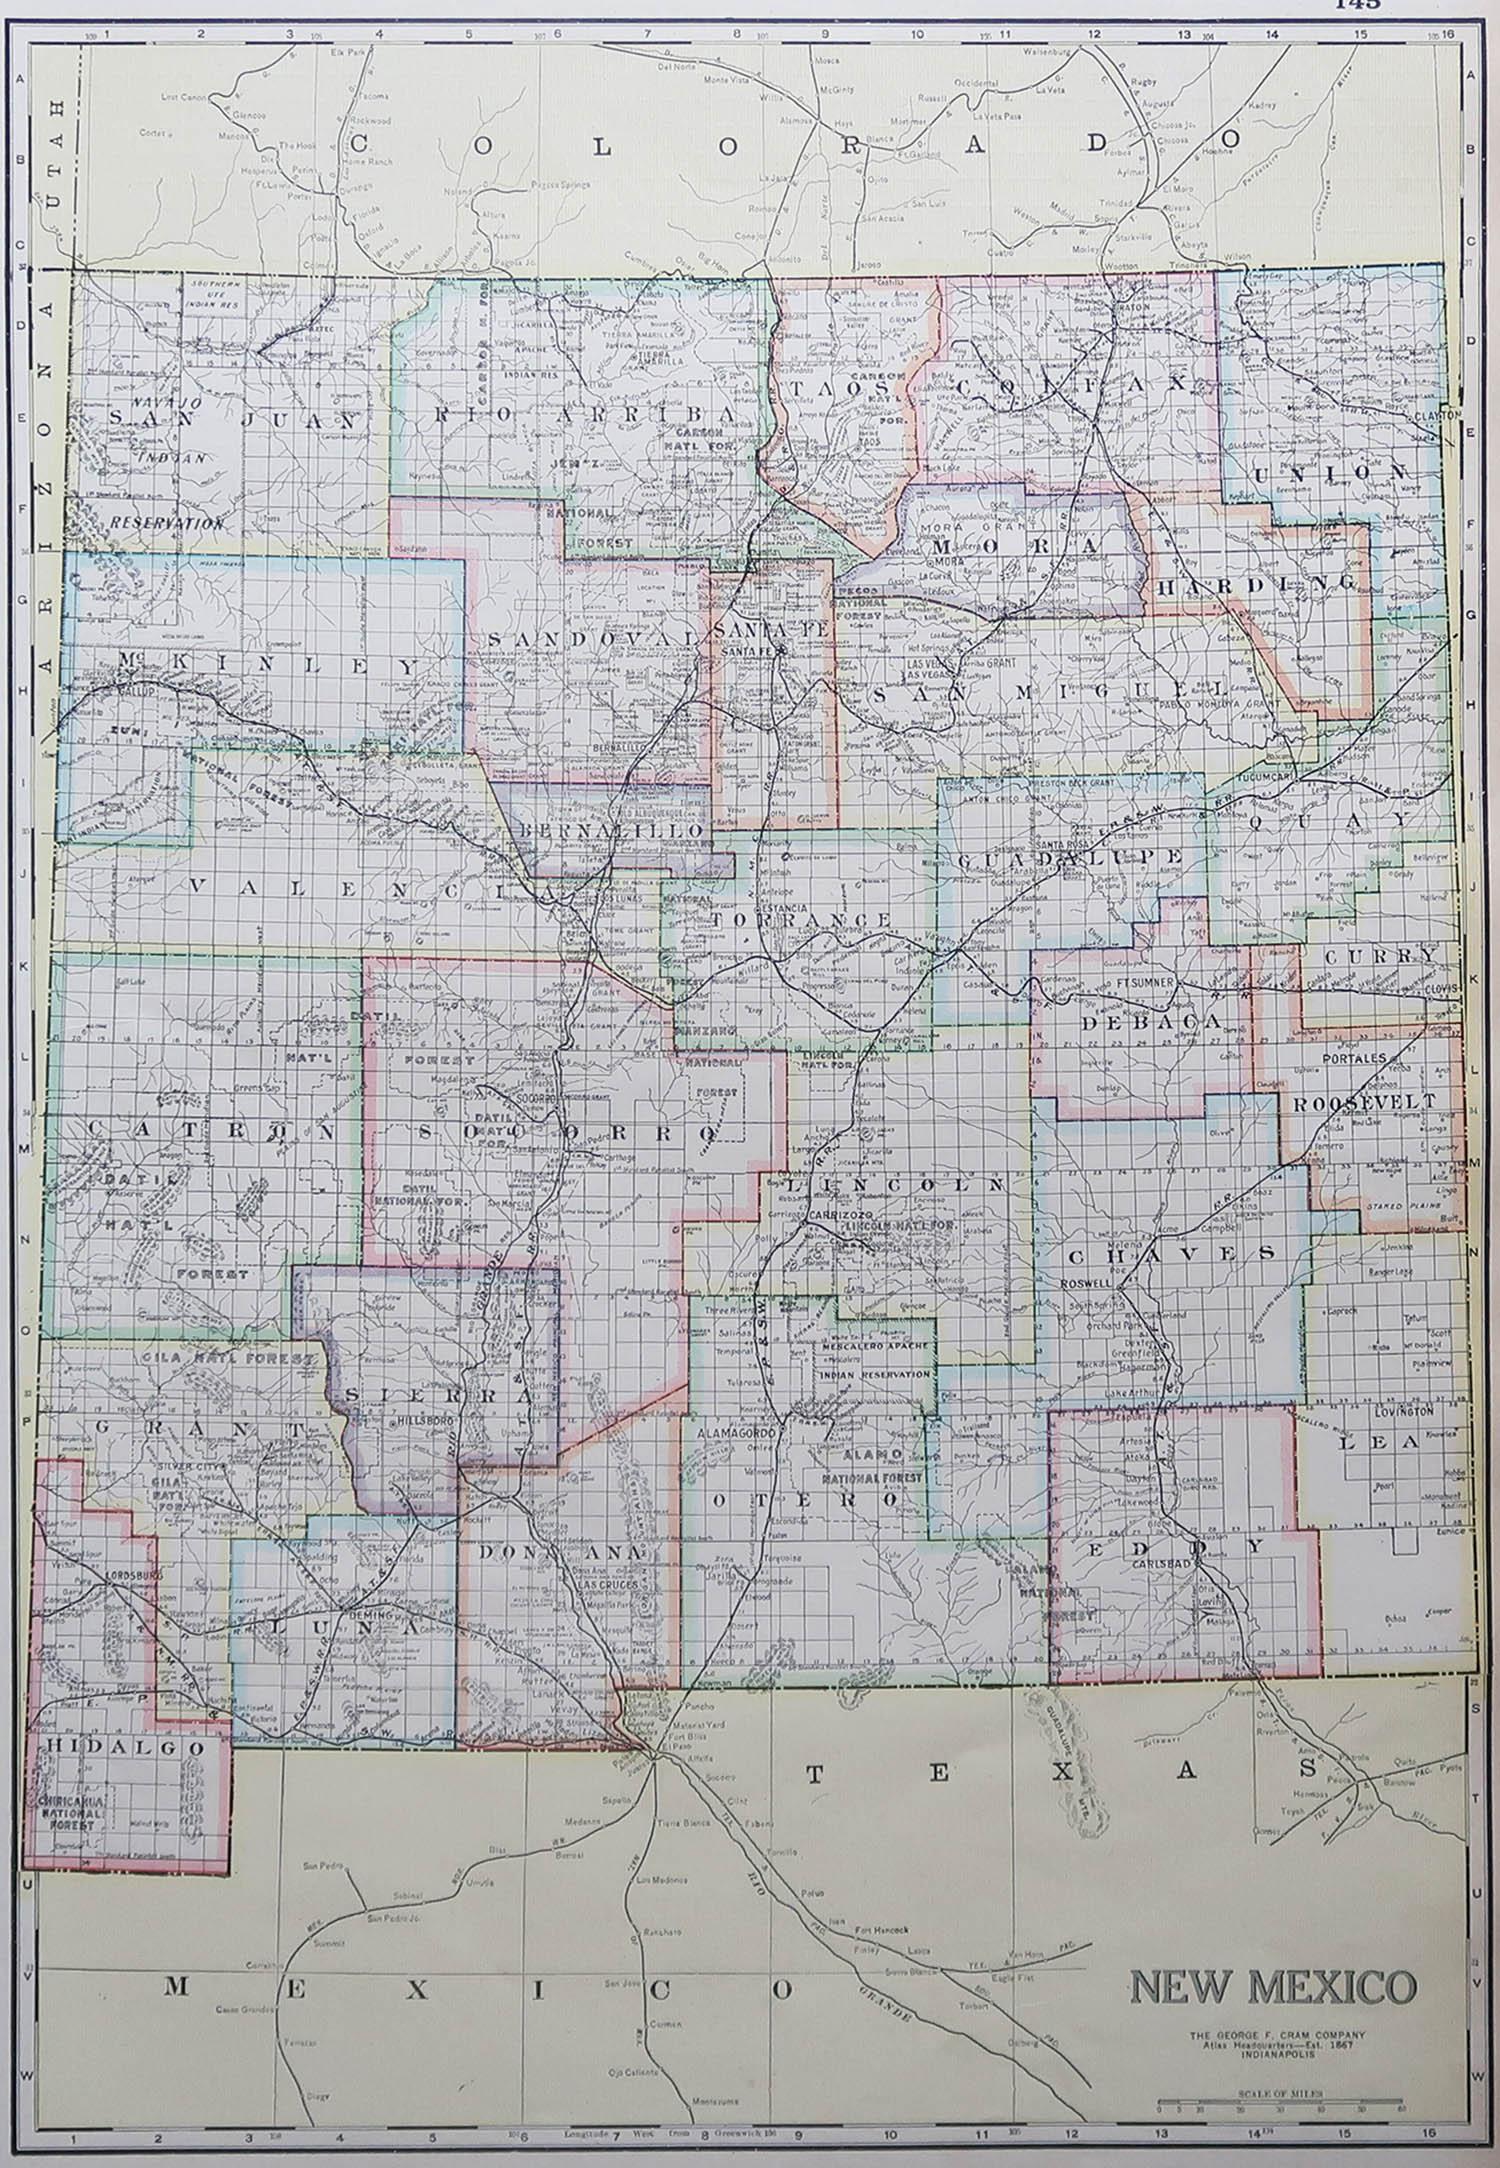 Fabulous map of New Mexico.

Original color.

Engraved and printed by the George F. Cram Company, Indianapolis.

Published, C.1900.

Unframed.

Free shipping.